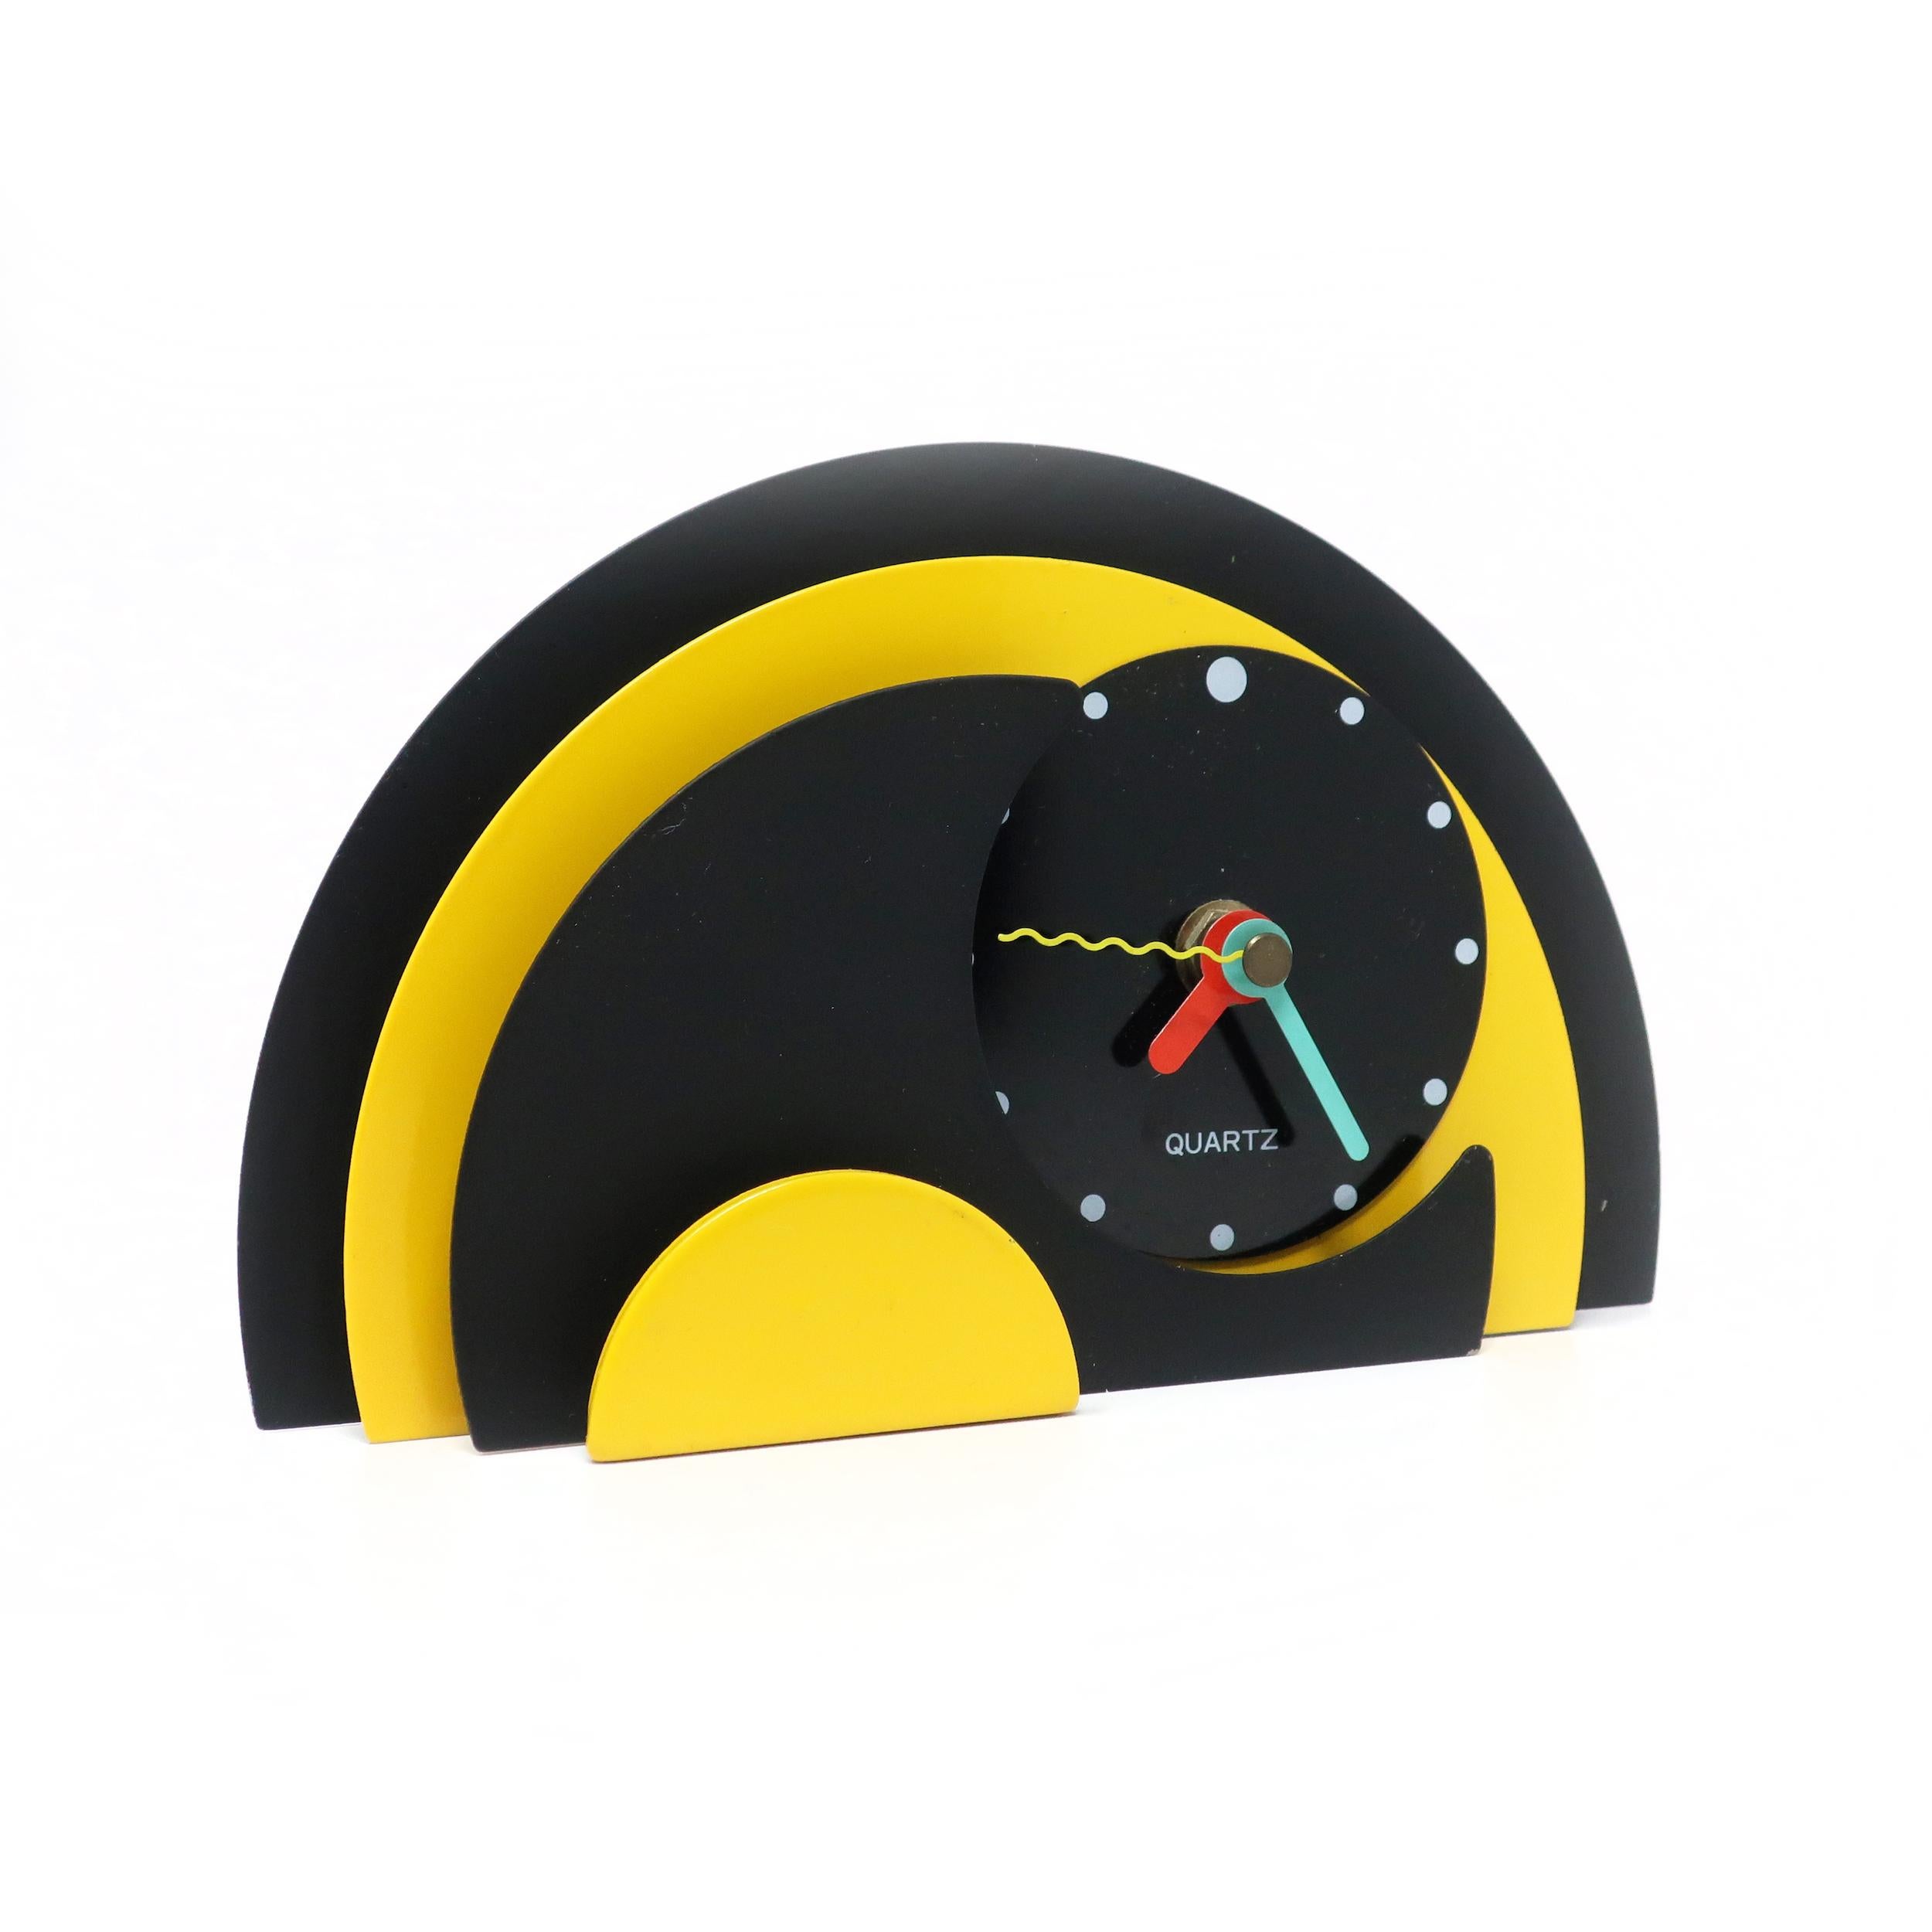 1980s Yellow & Black Stacked Desk or Mantel Clock In Good Condition For Sale In Brooklyn, NY